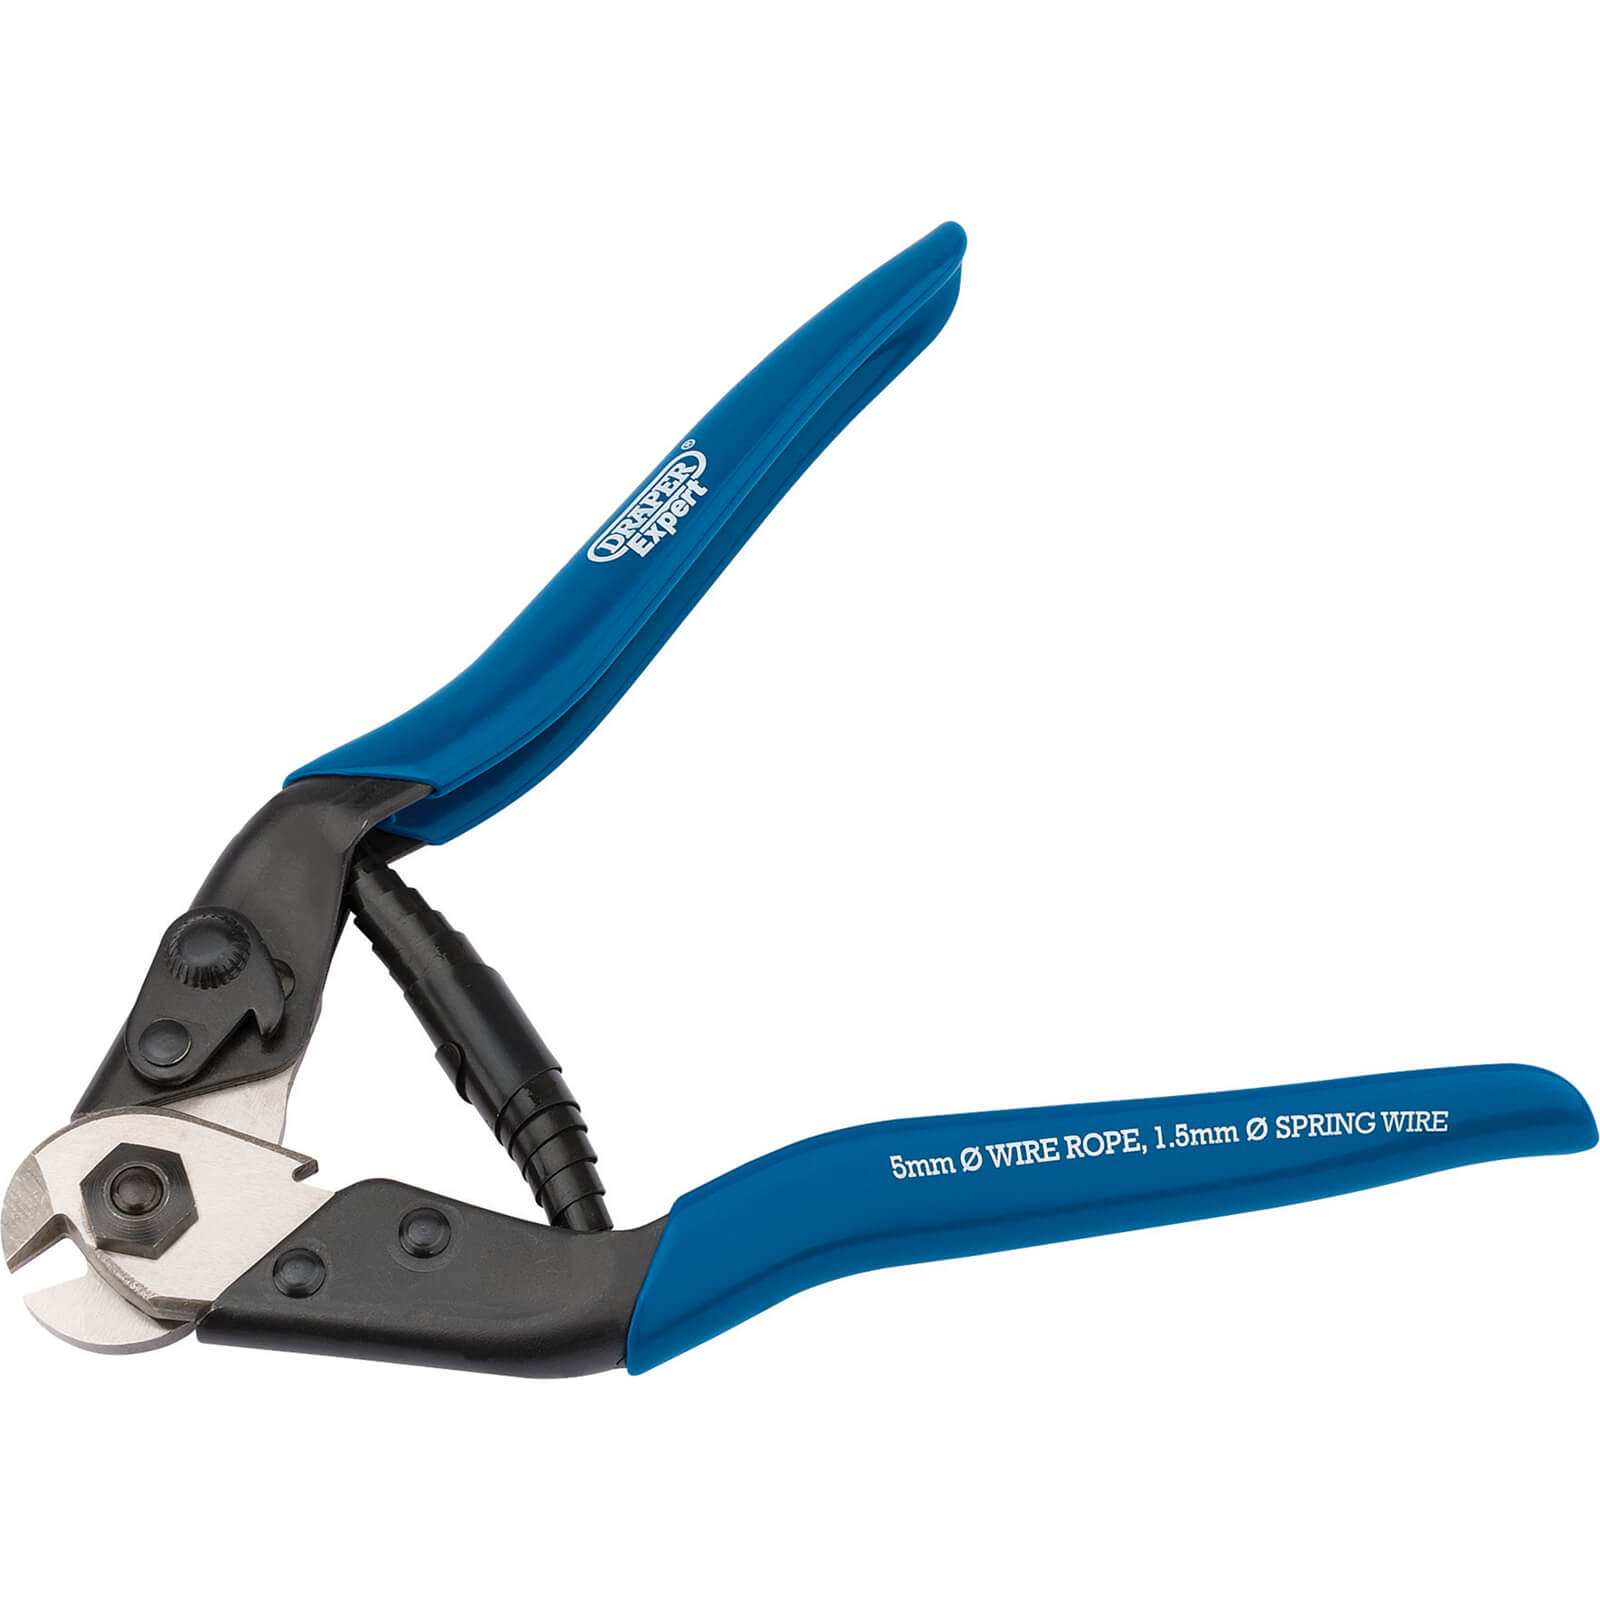 Draper 190mm Wire Rope Or Spring Wire Cutter